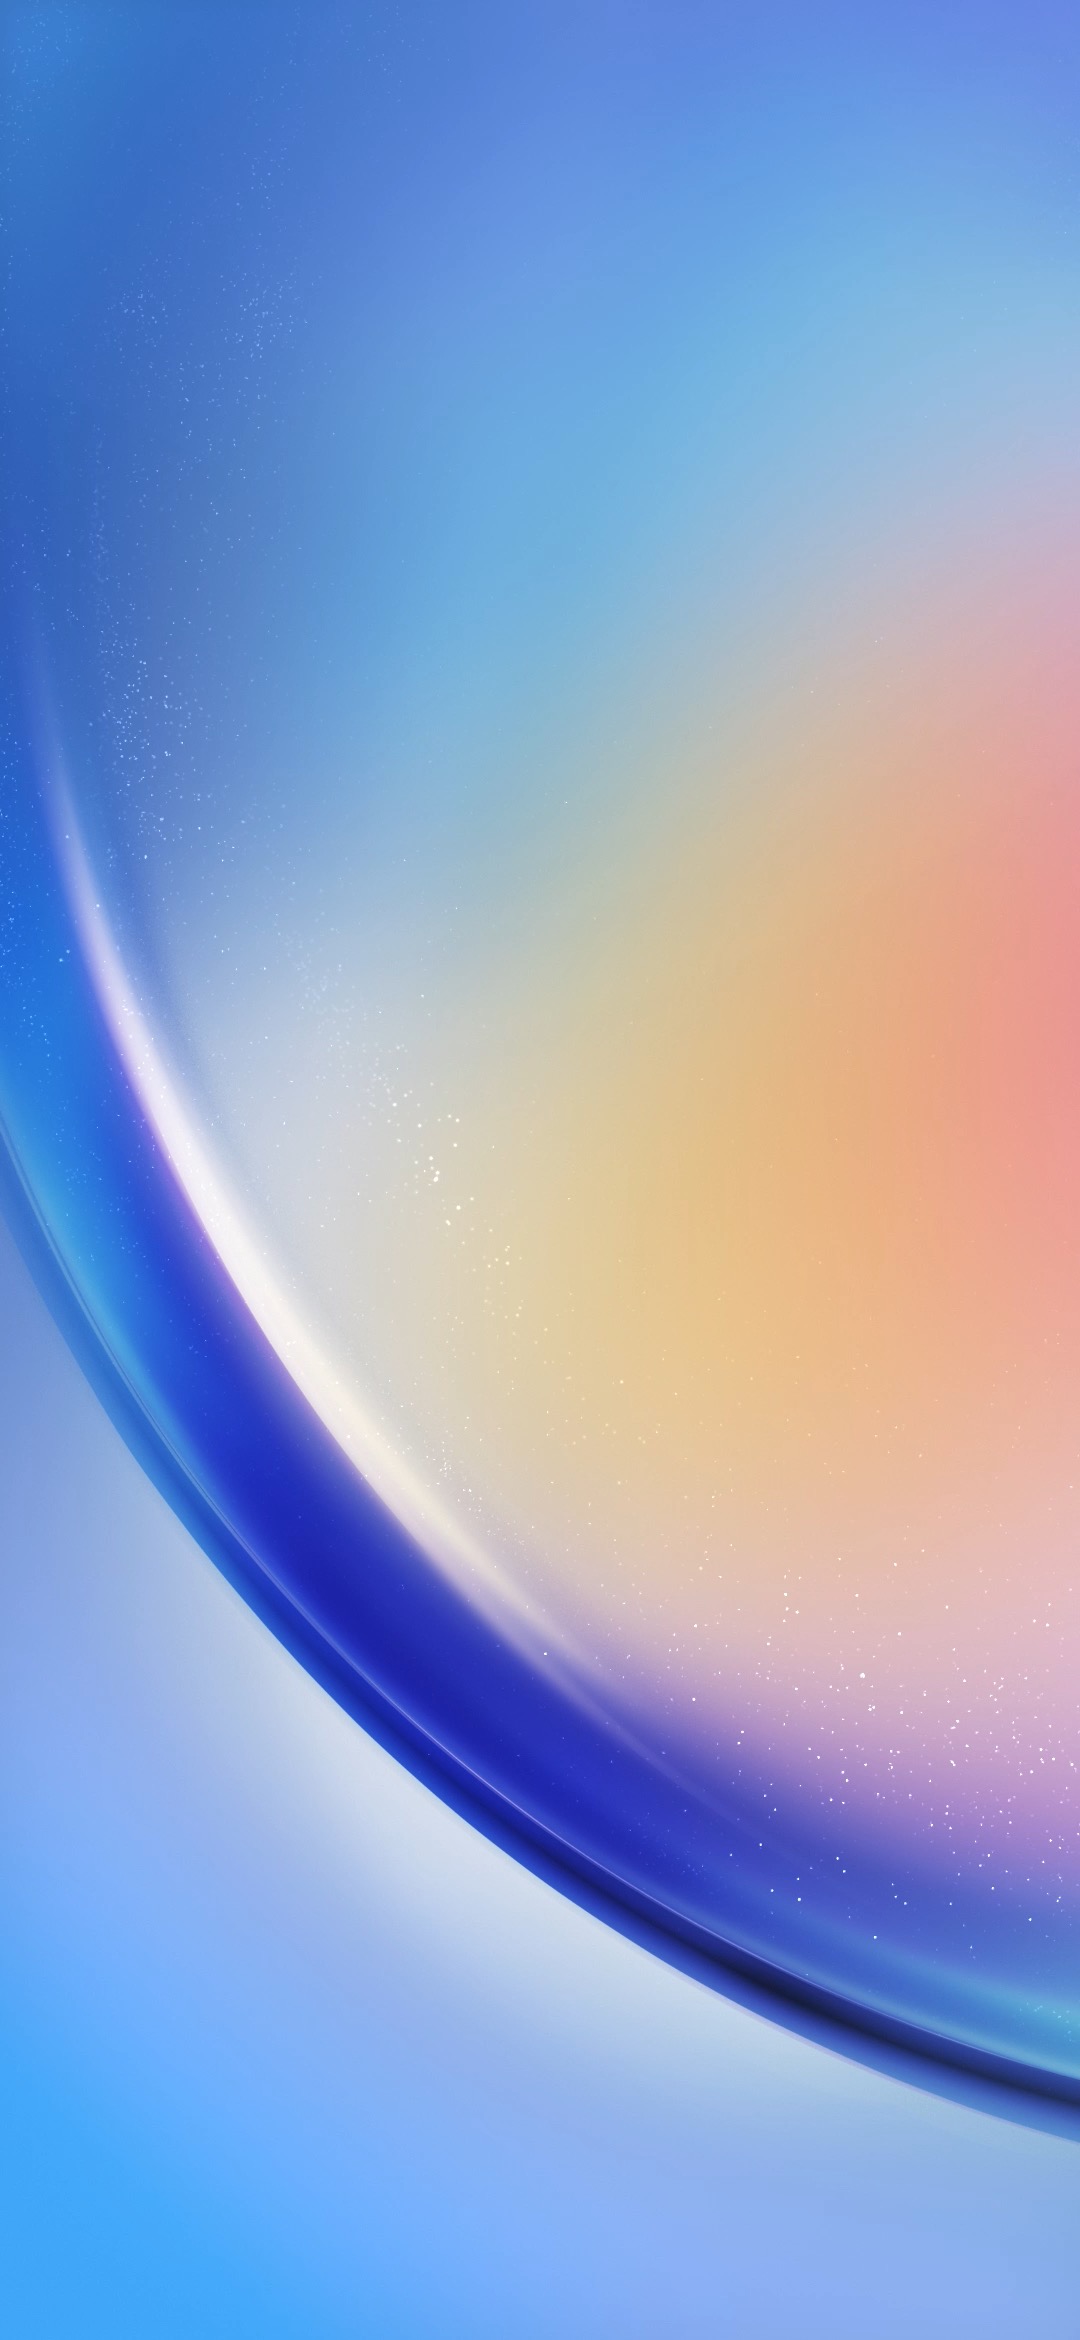 A51 wallpapers and live wallpapers  Samsung Members